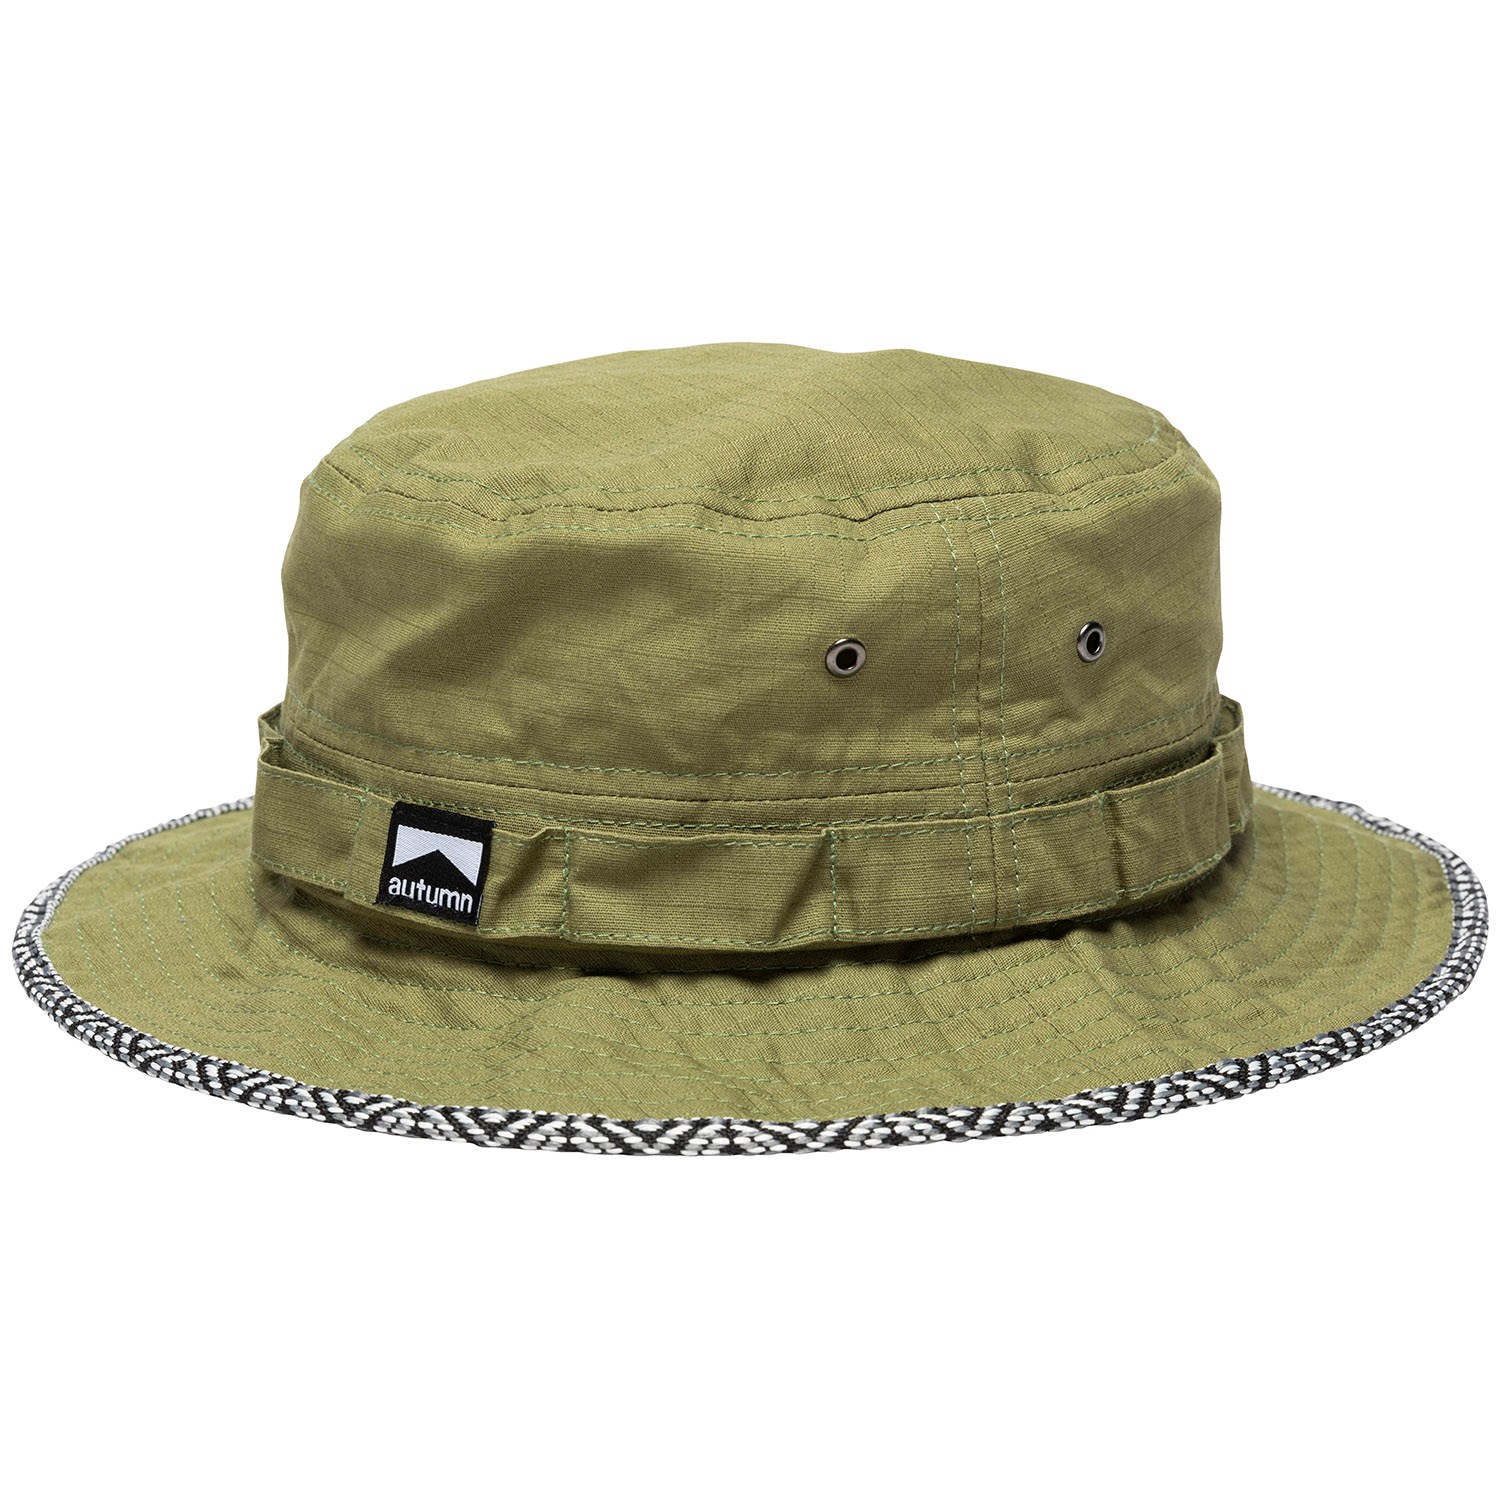 Шляпа Autumn Boonie, зеленый canze camouflage tactical hat round brimmed boonie hat outdoor mountaineering fisherman hat double side sun hat